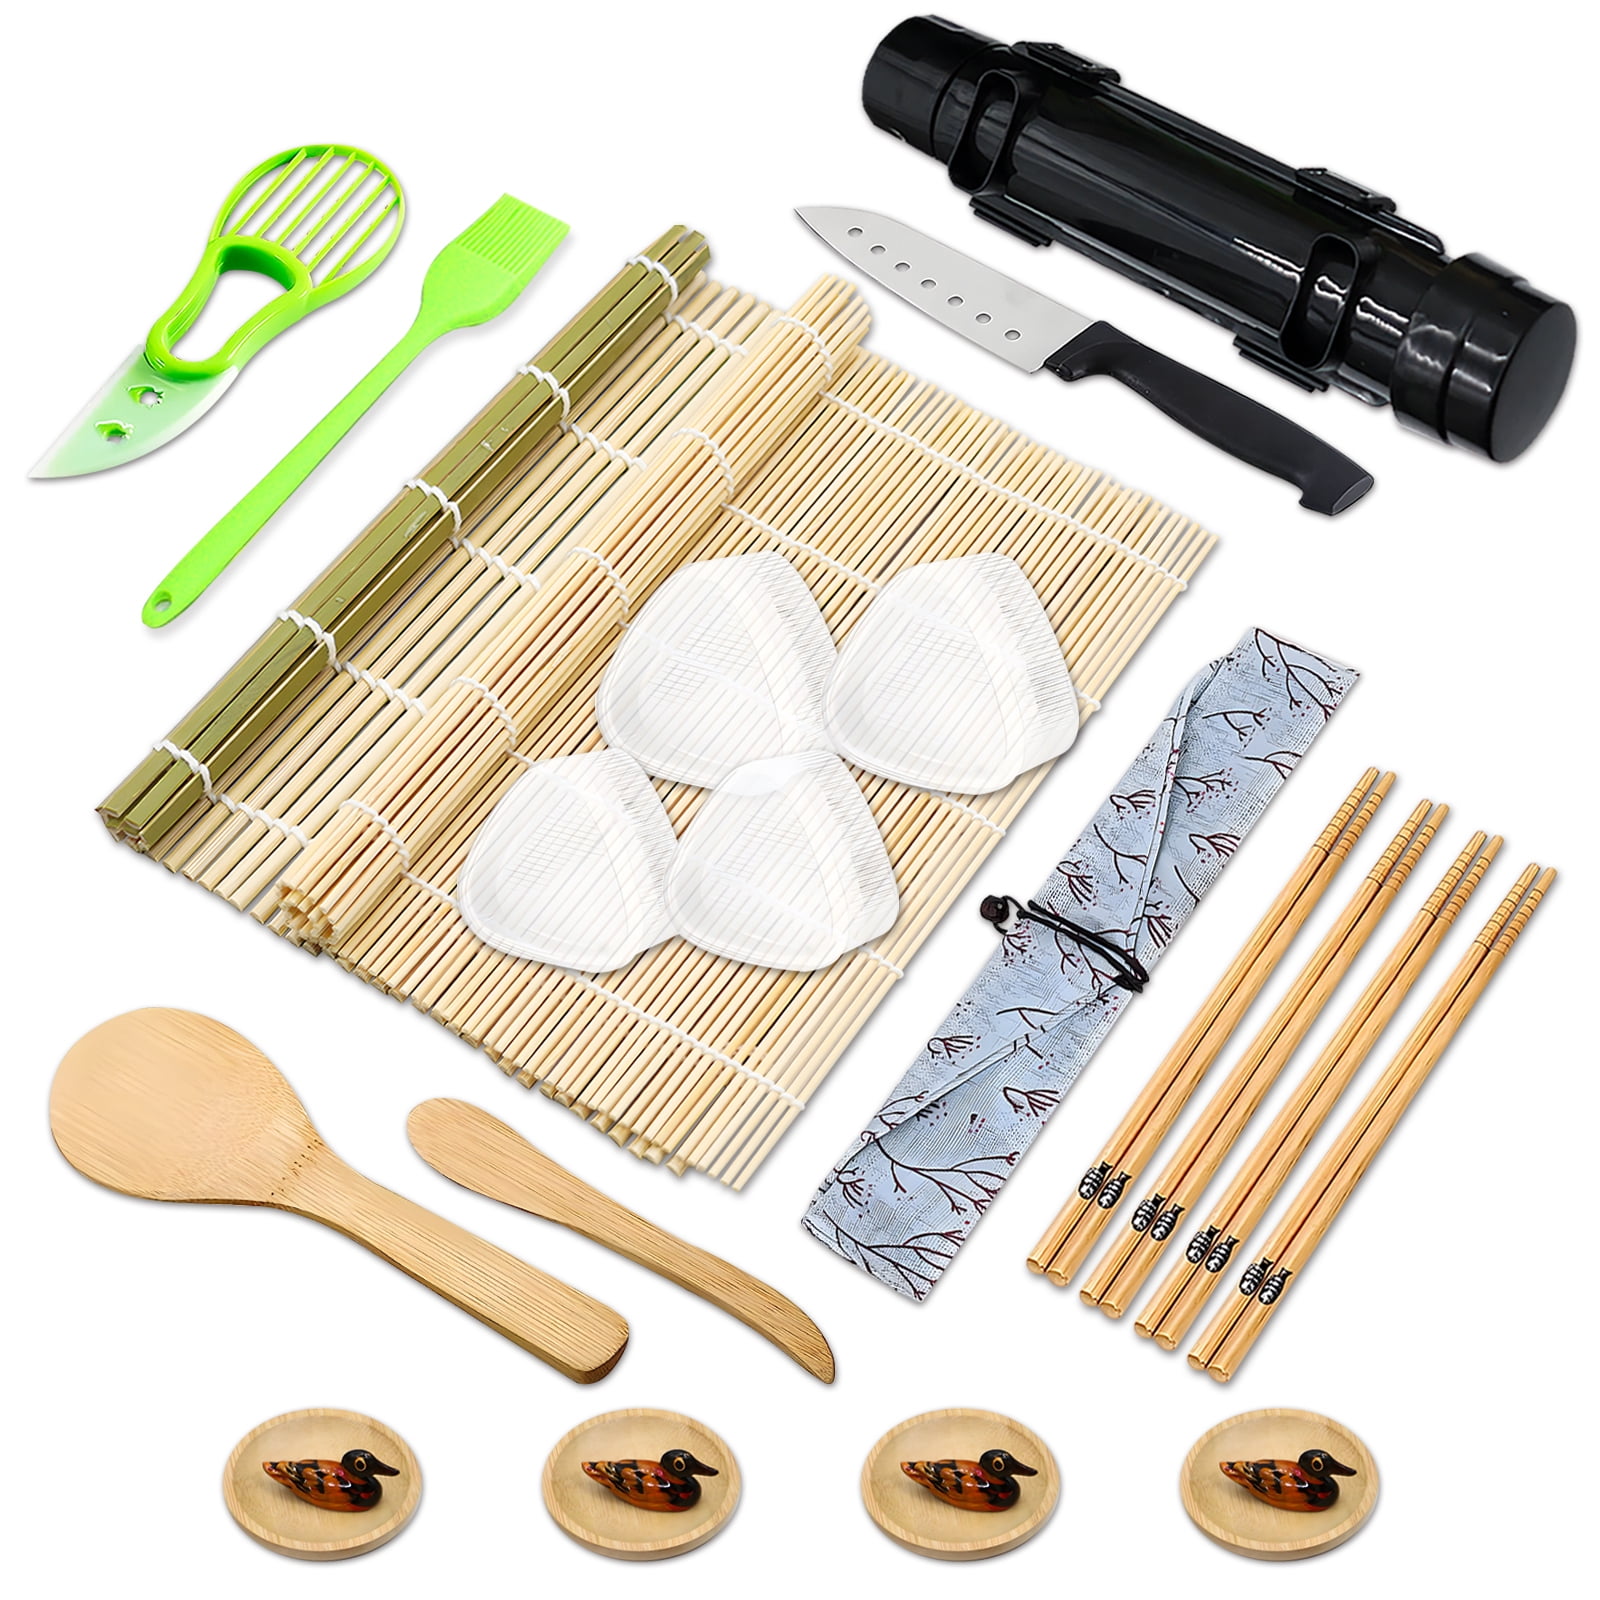 VinDrea Sushi Making Kit for Beginners - Bazooka Roller Kits - Bamboo Rolling Tools - Easy DIY Sushi Maker Set - A Fun Way to Make Your Own Sushi at